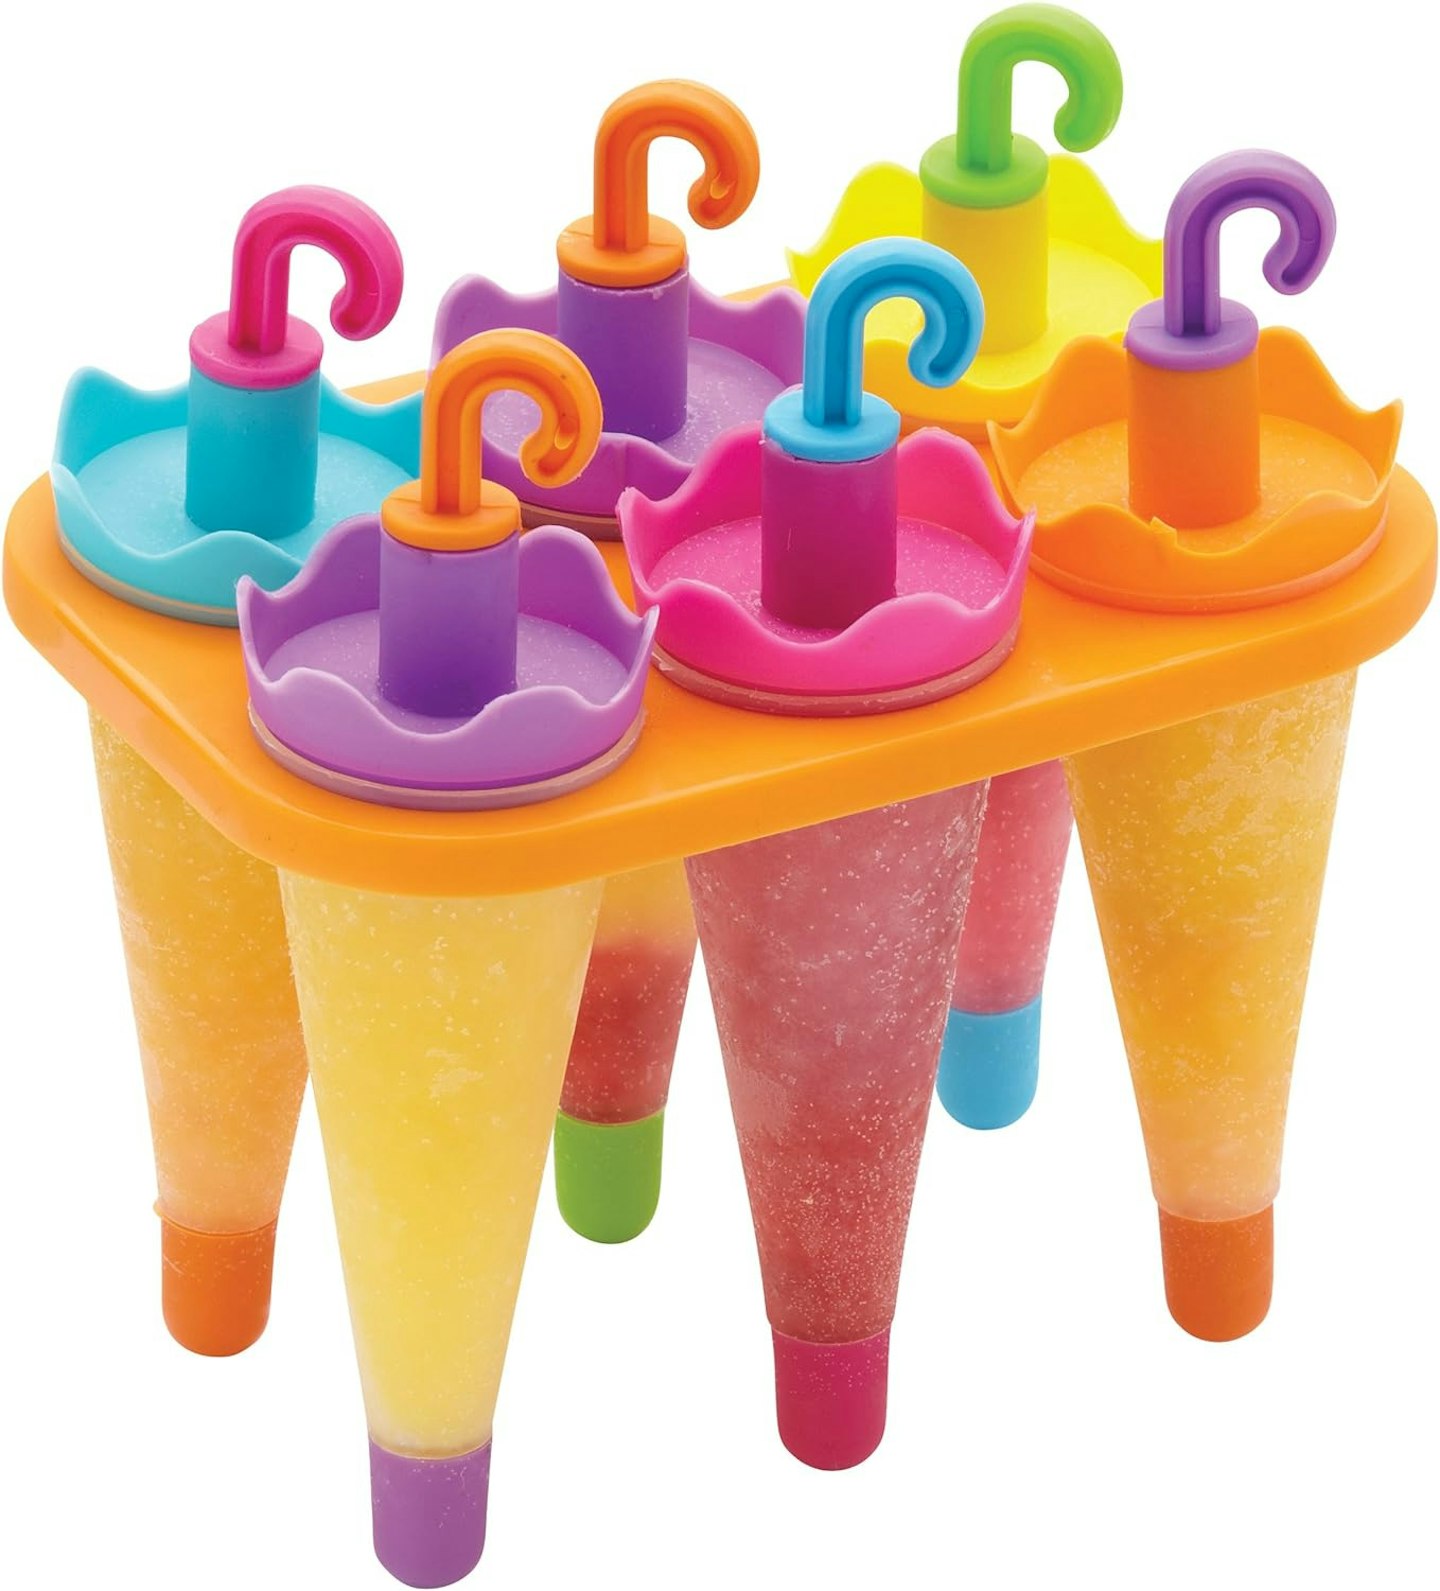 Ice lolly moulds 